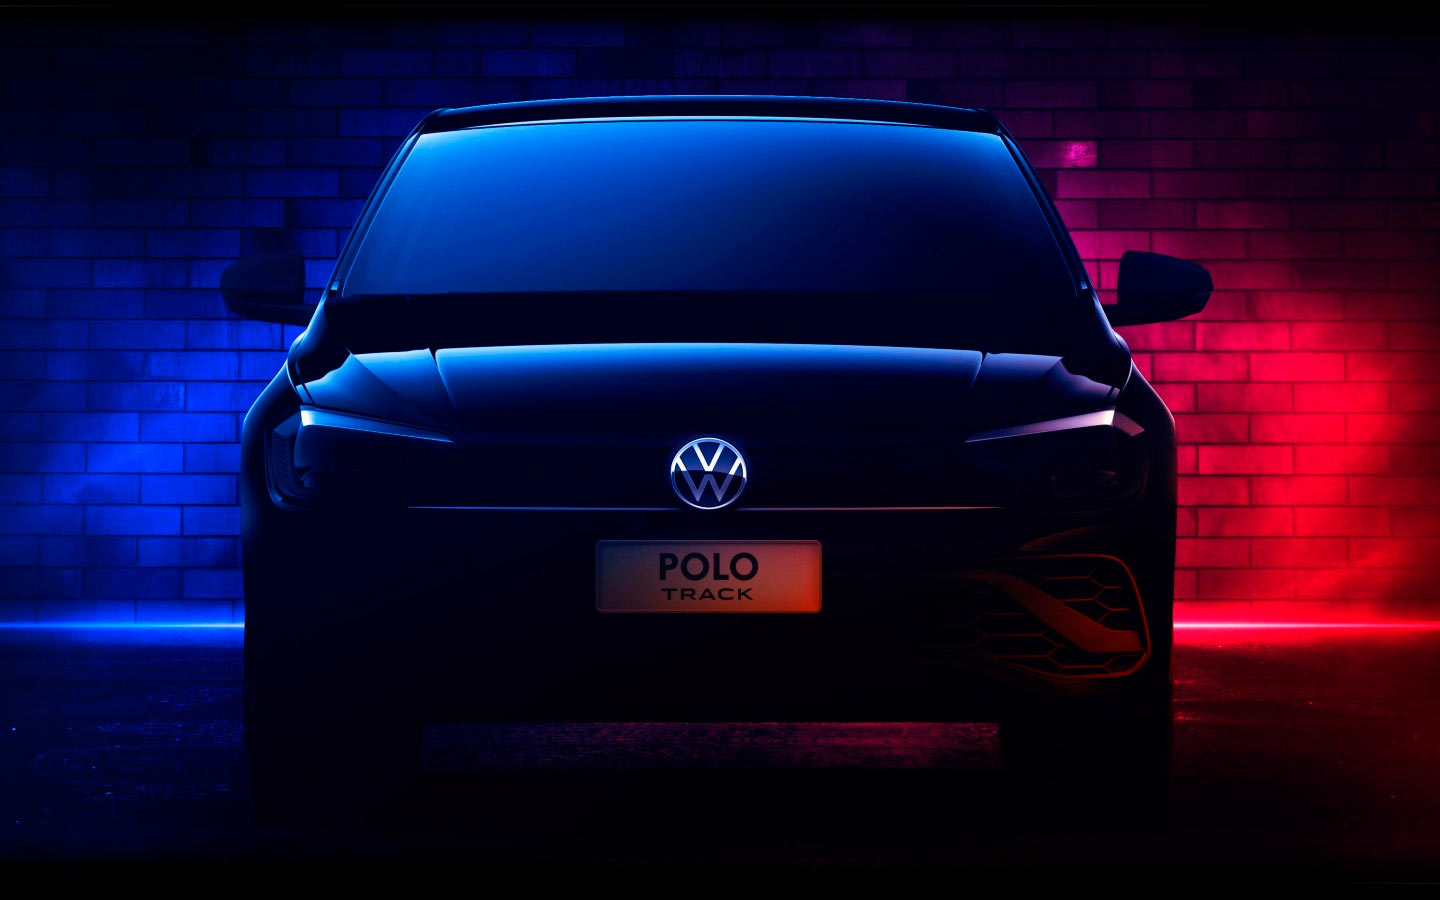 Volkswagen has announced a budget version of the Polo